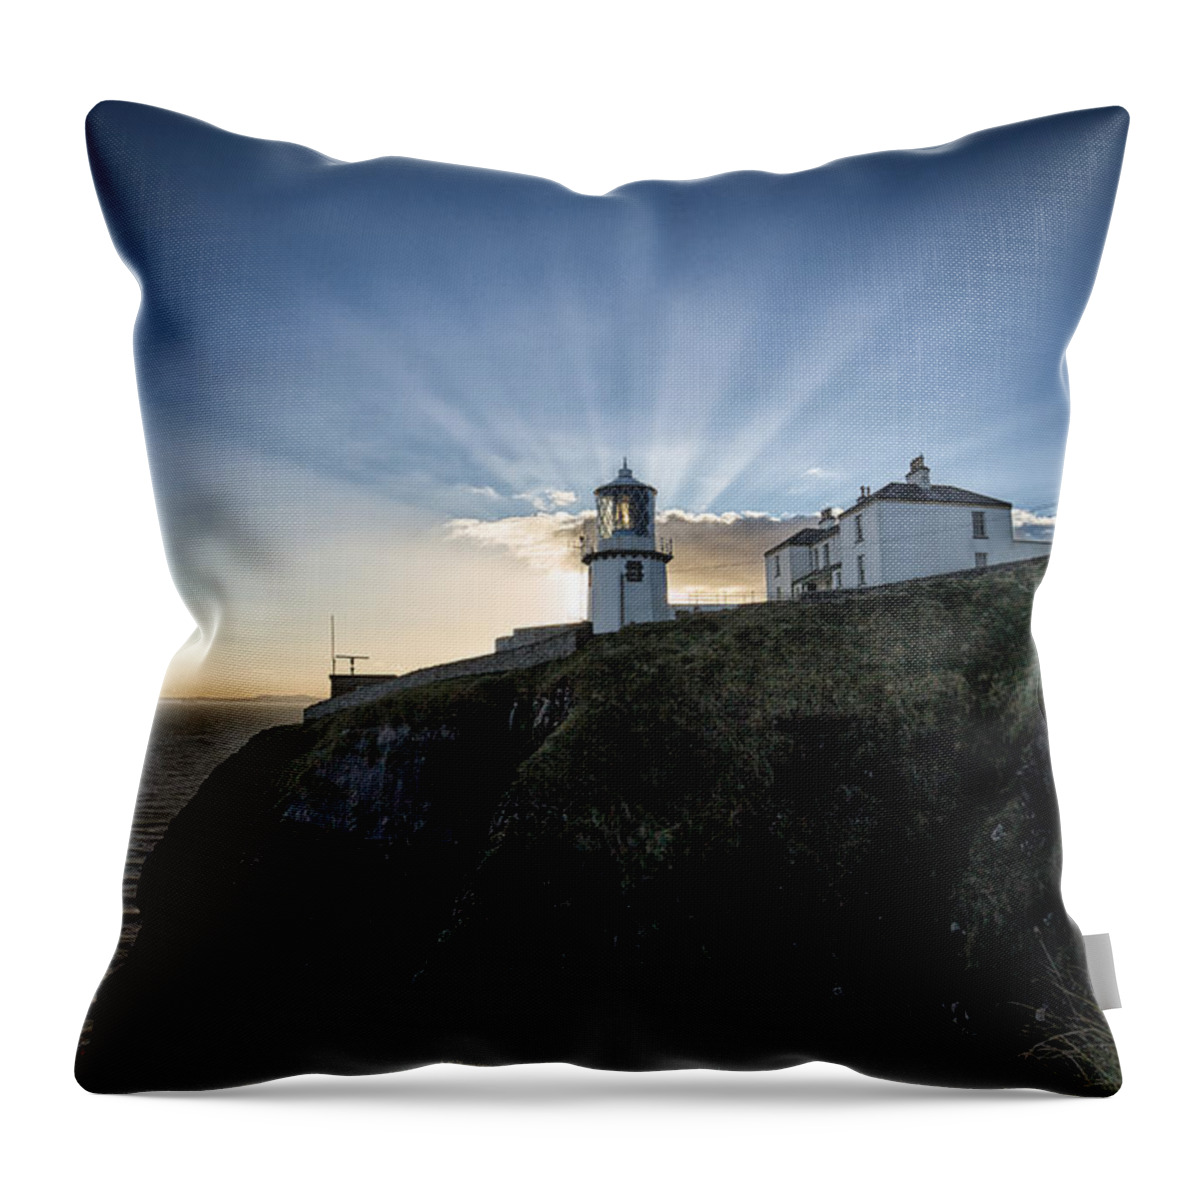 Lighthouse Throw Pillow featuring the photograph Blackhead Lighthouse Sunset by Nigel R Bell